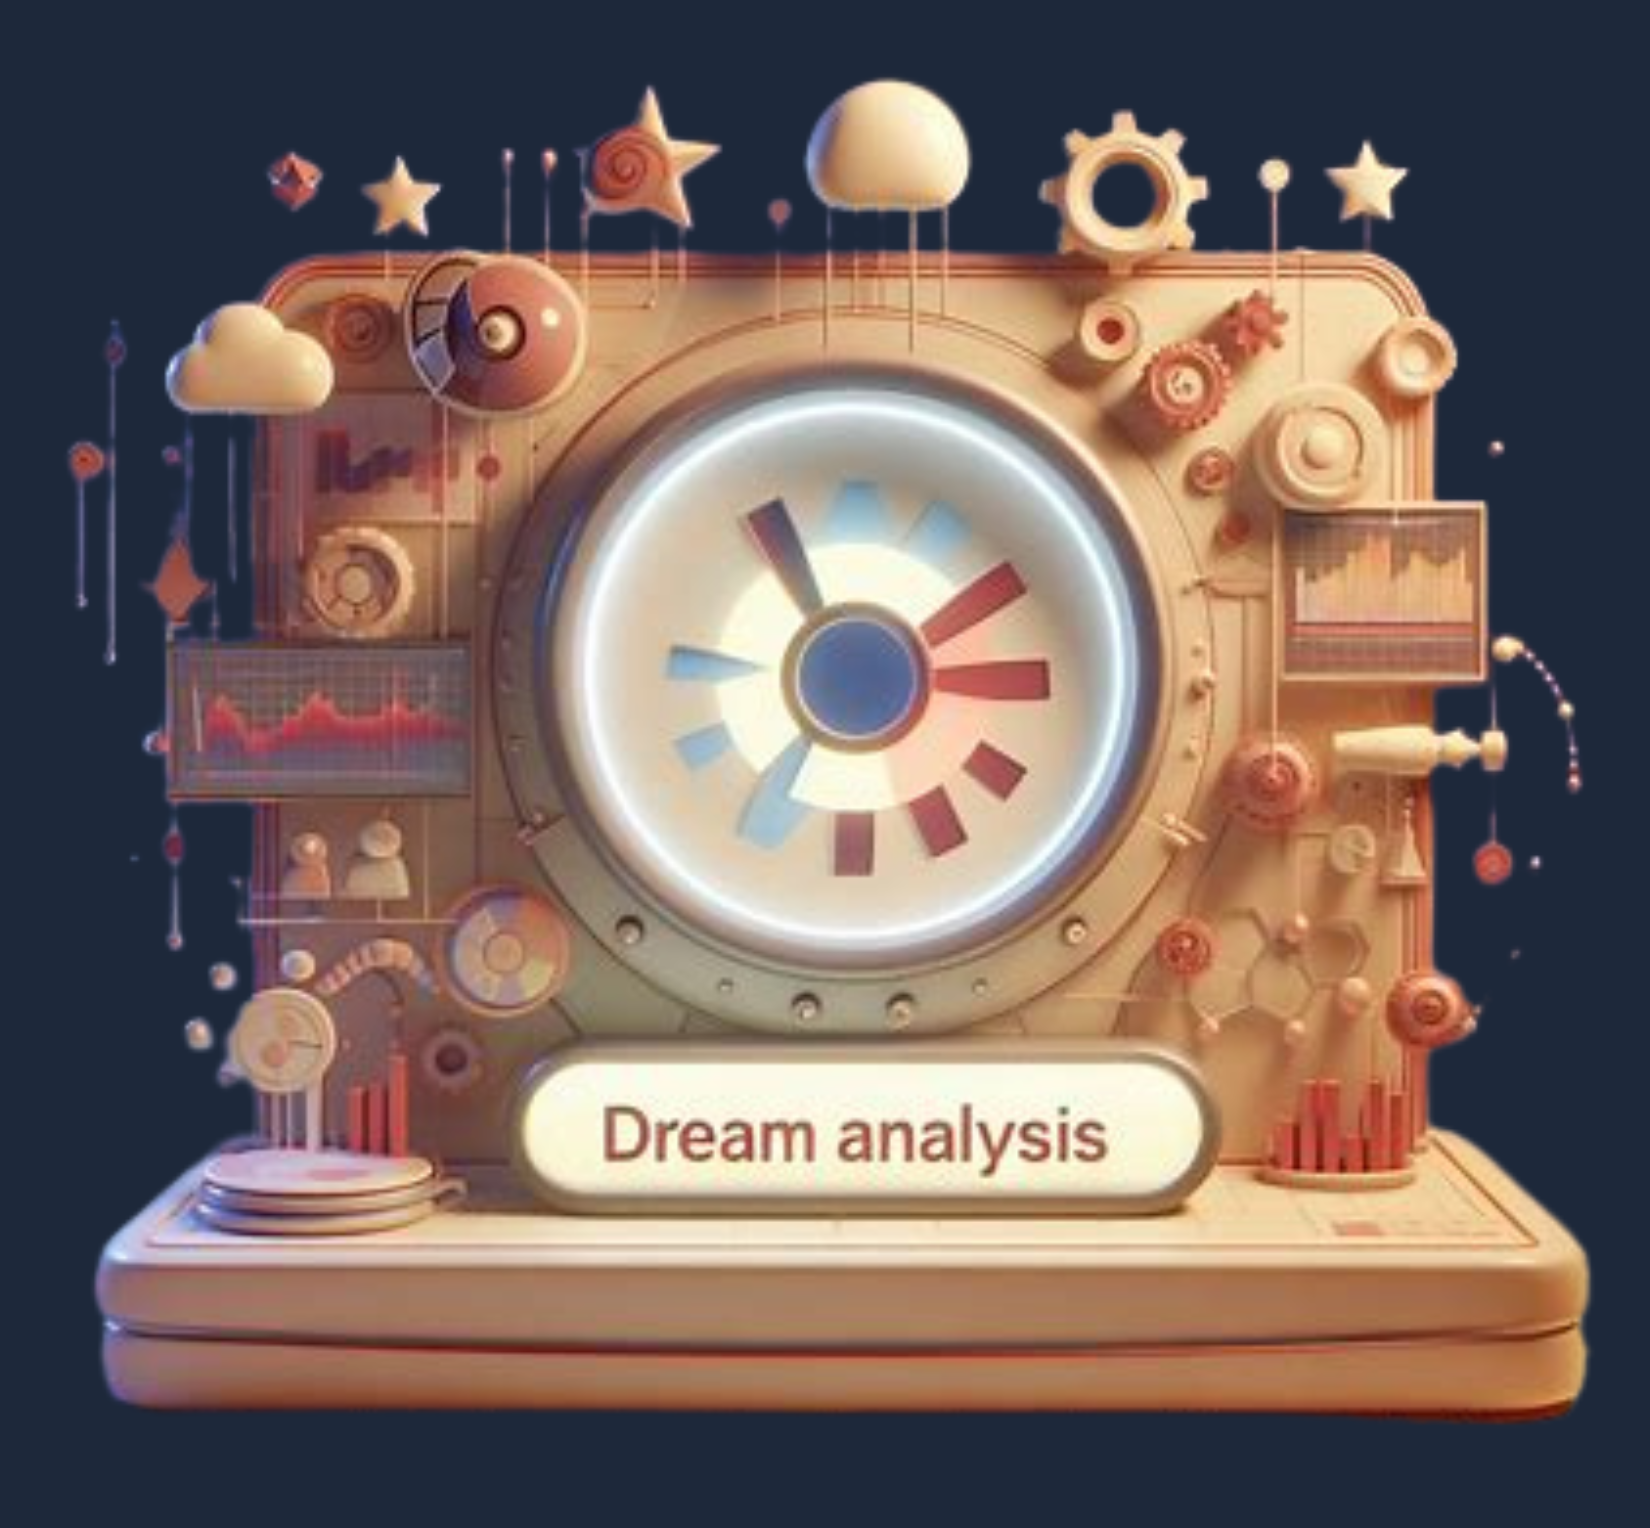 DreamSwan - User Details and Analysis